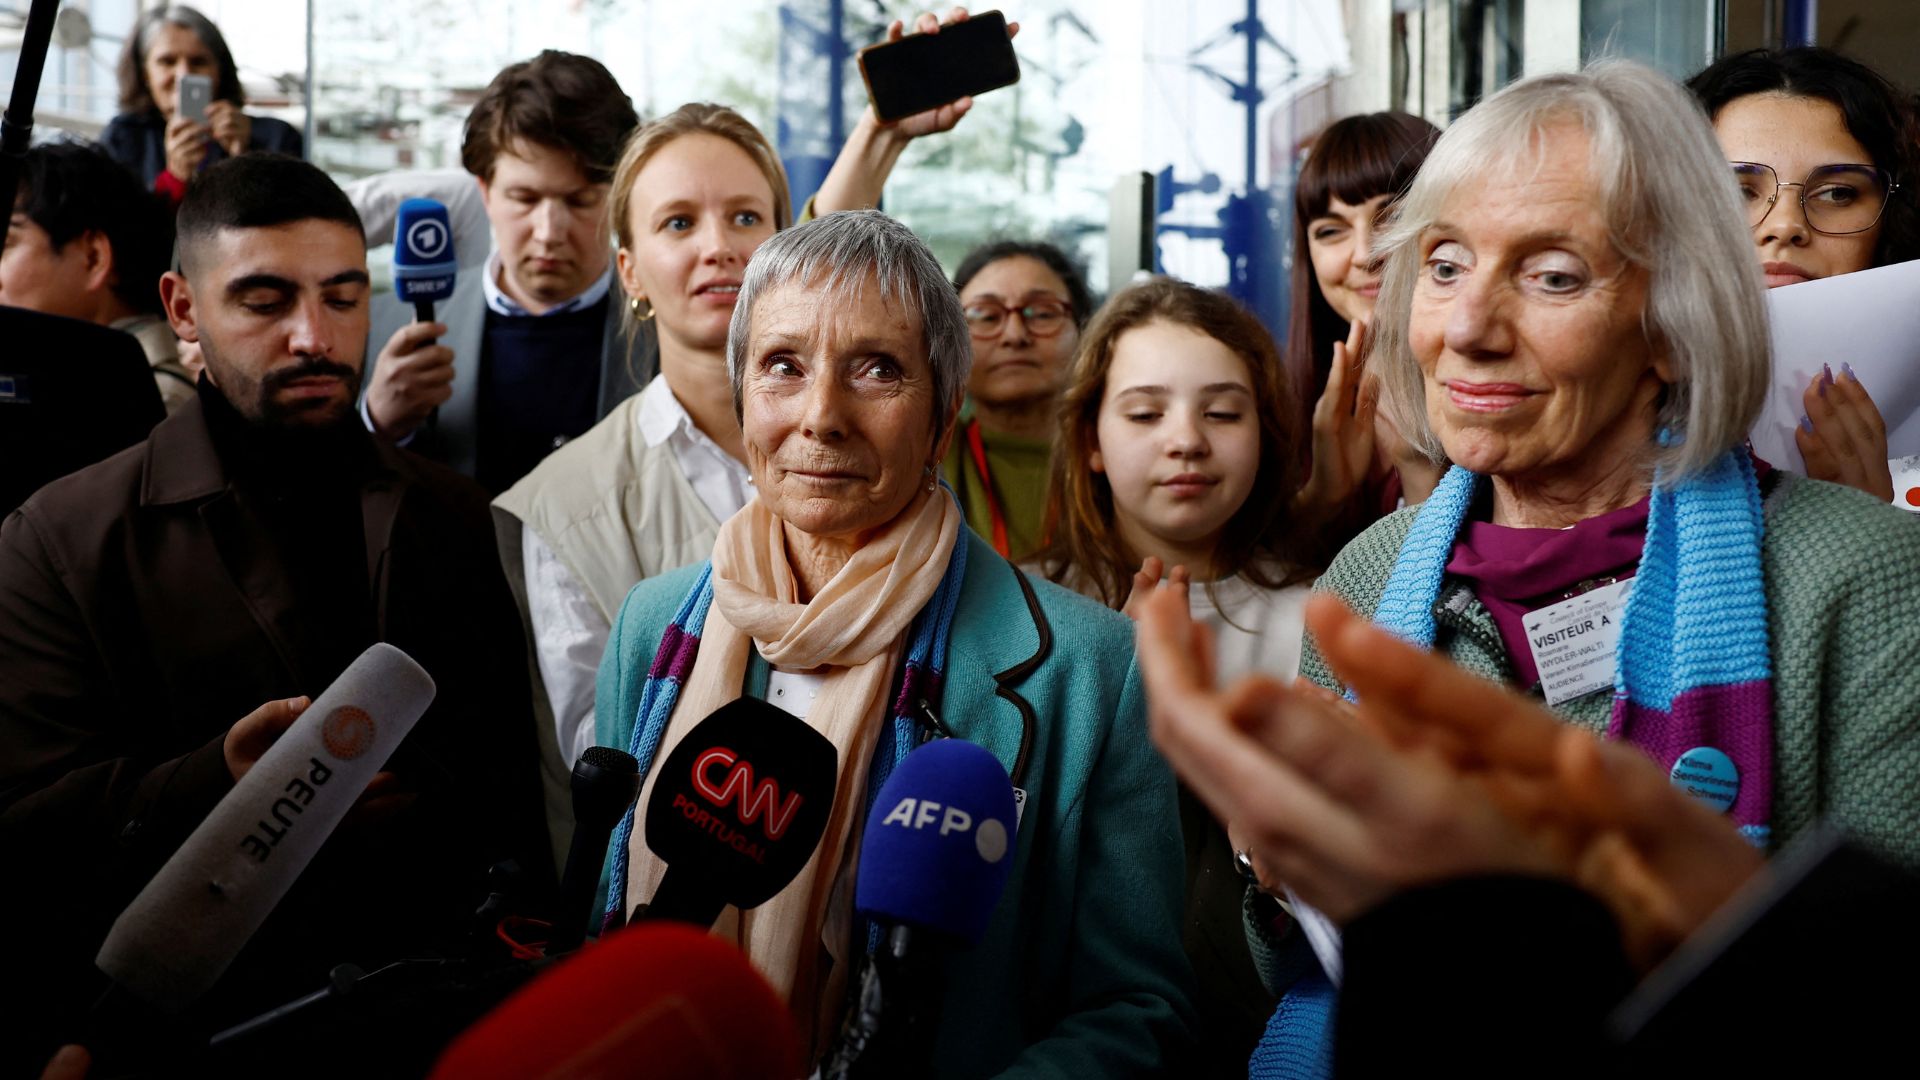 Anne Mahrer and Rosmarie Wydler-Walti of the KlimaSeniorinnen group talk to journalists outside the court. /Christian Hartmann/Reuters